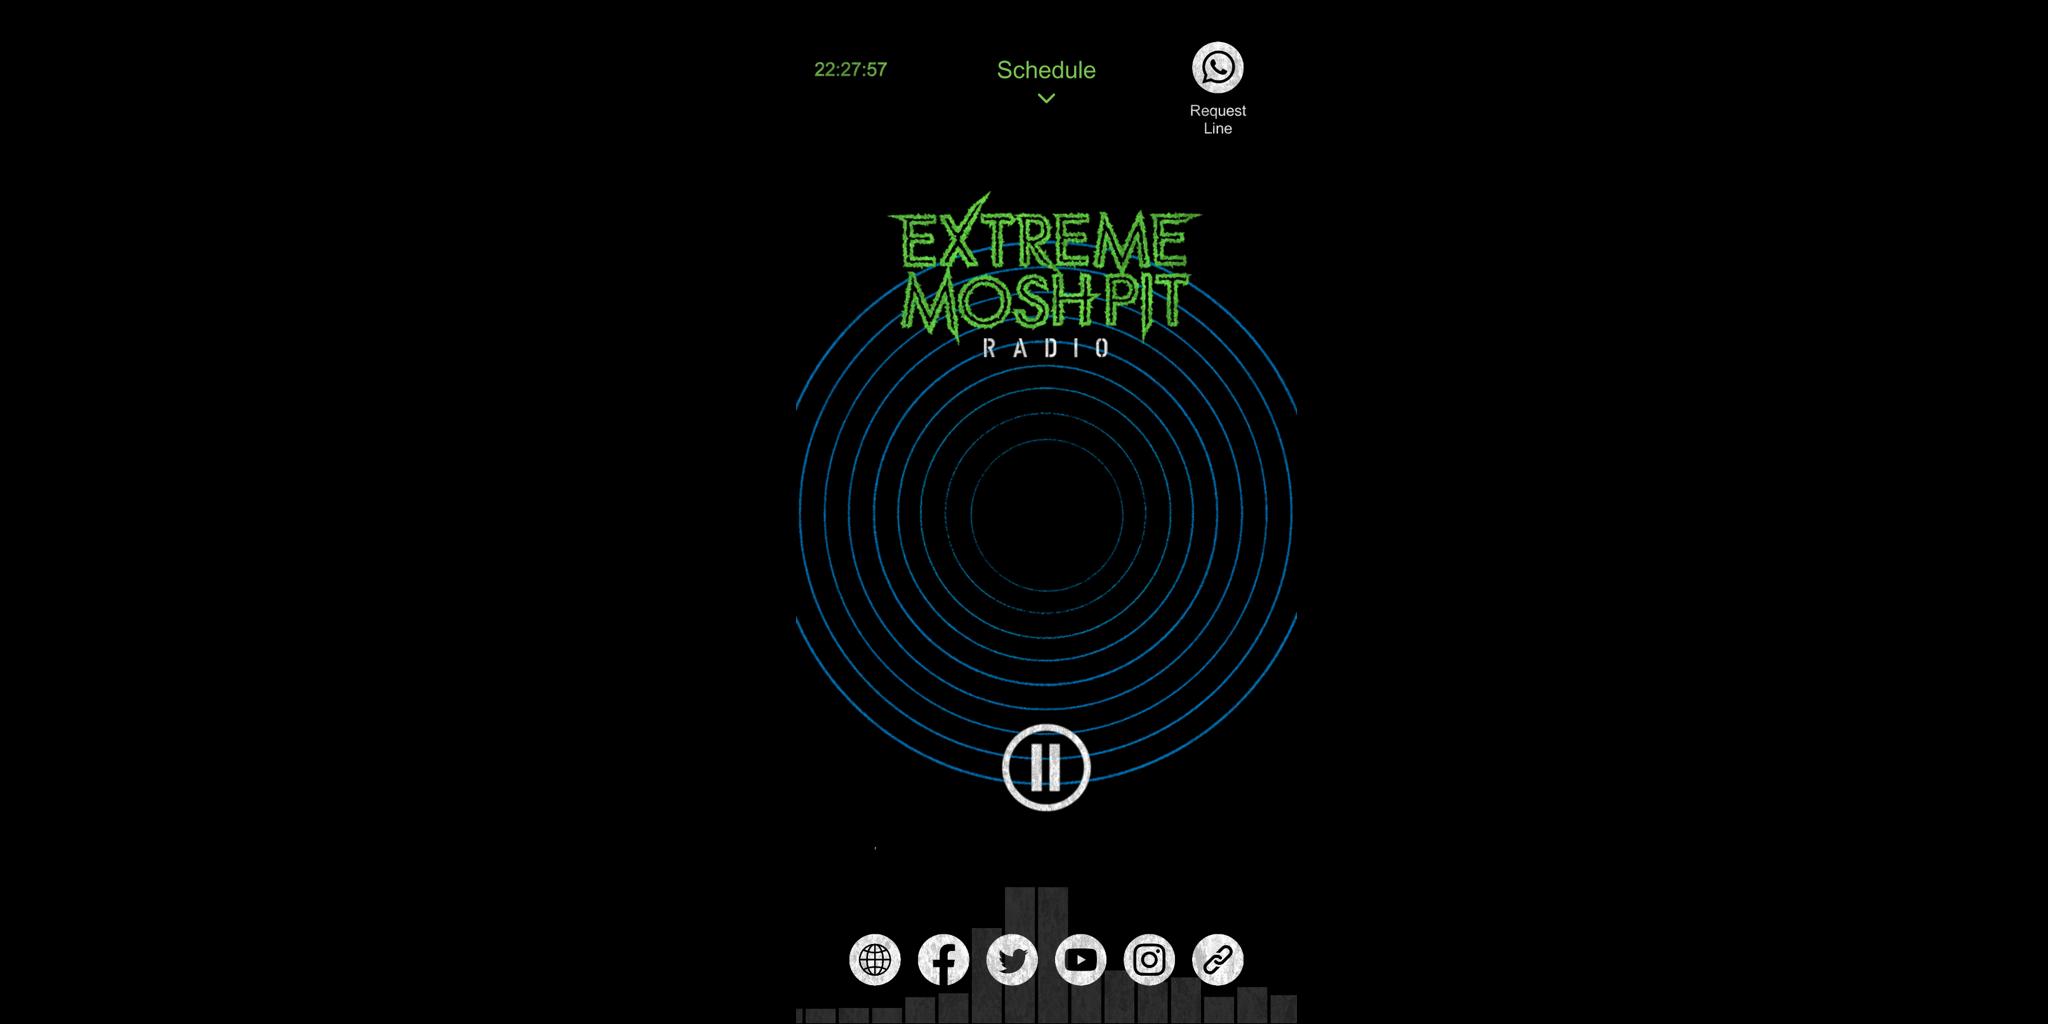 Extreme Moshpit Radio for Android - APK Download